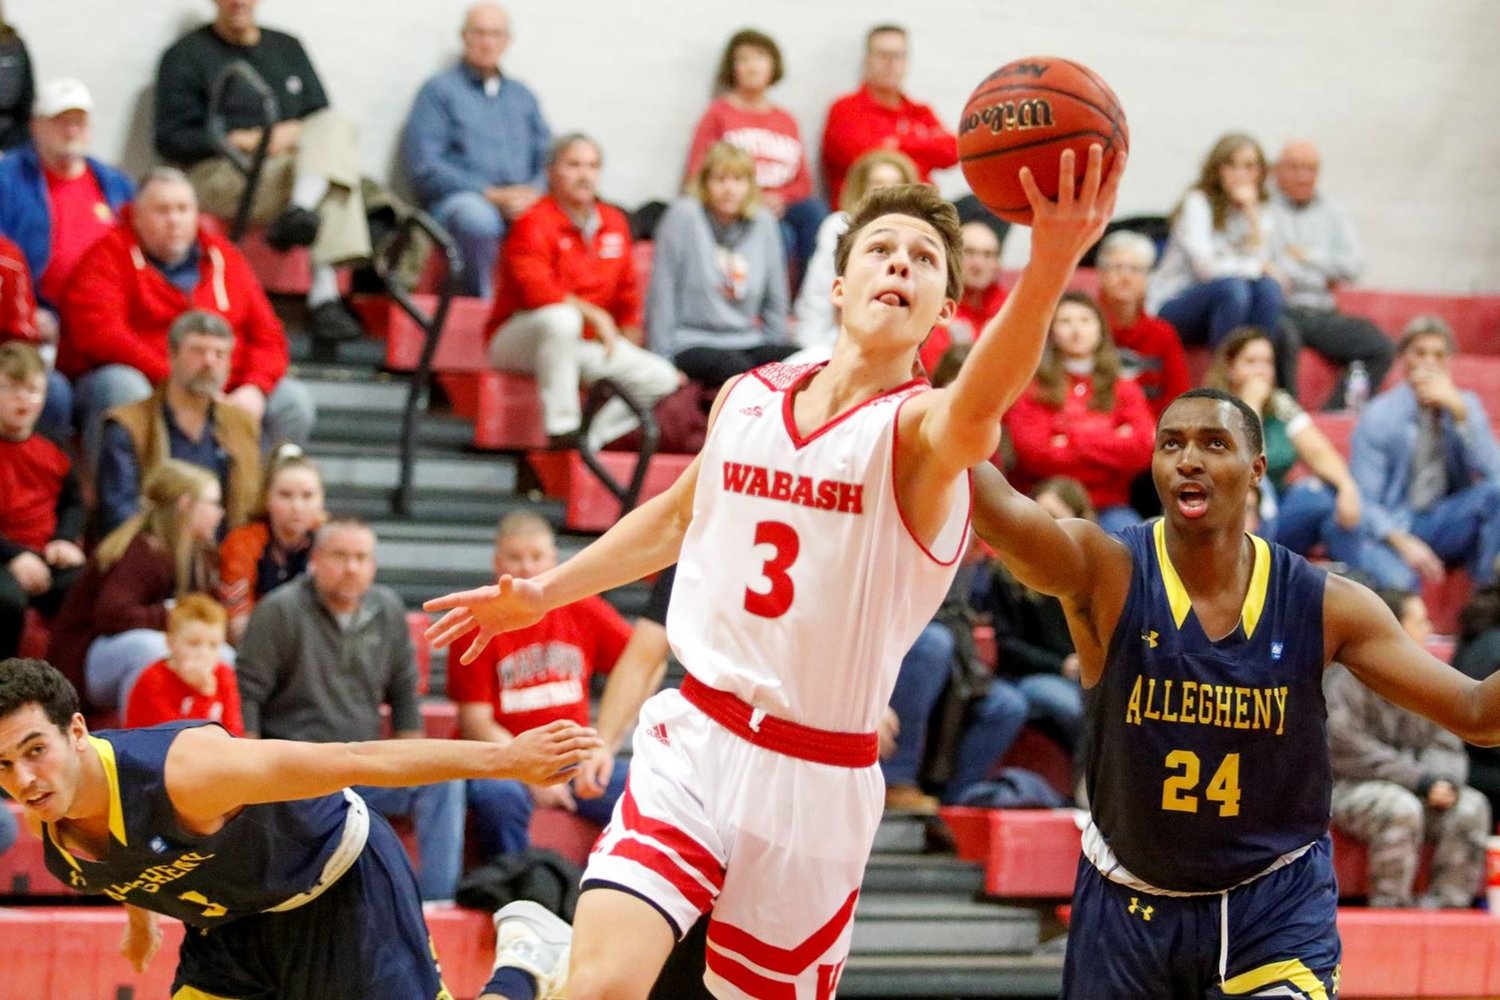 Wabash senior guard Jack Davidson needs just 419 points to become the schools all-time leading scorer.